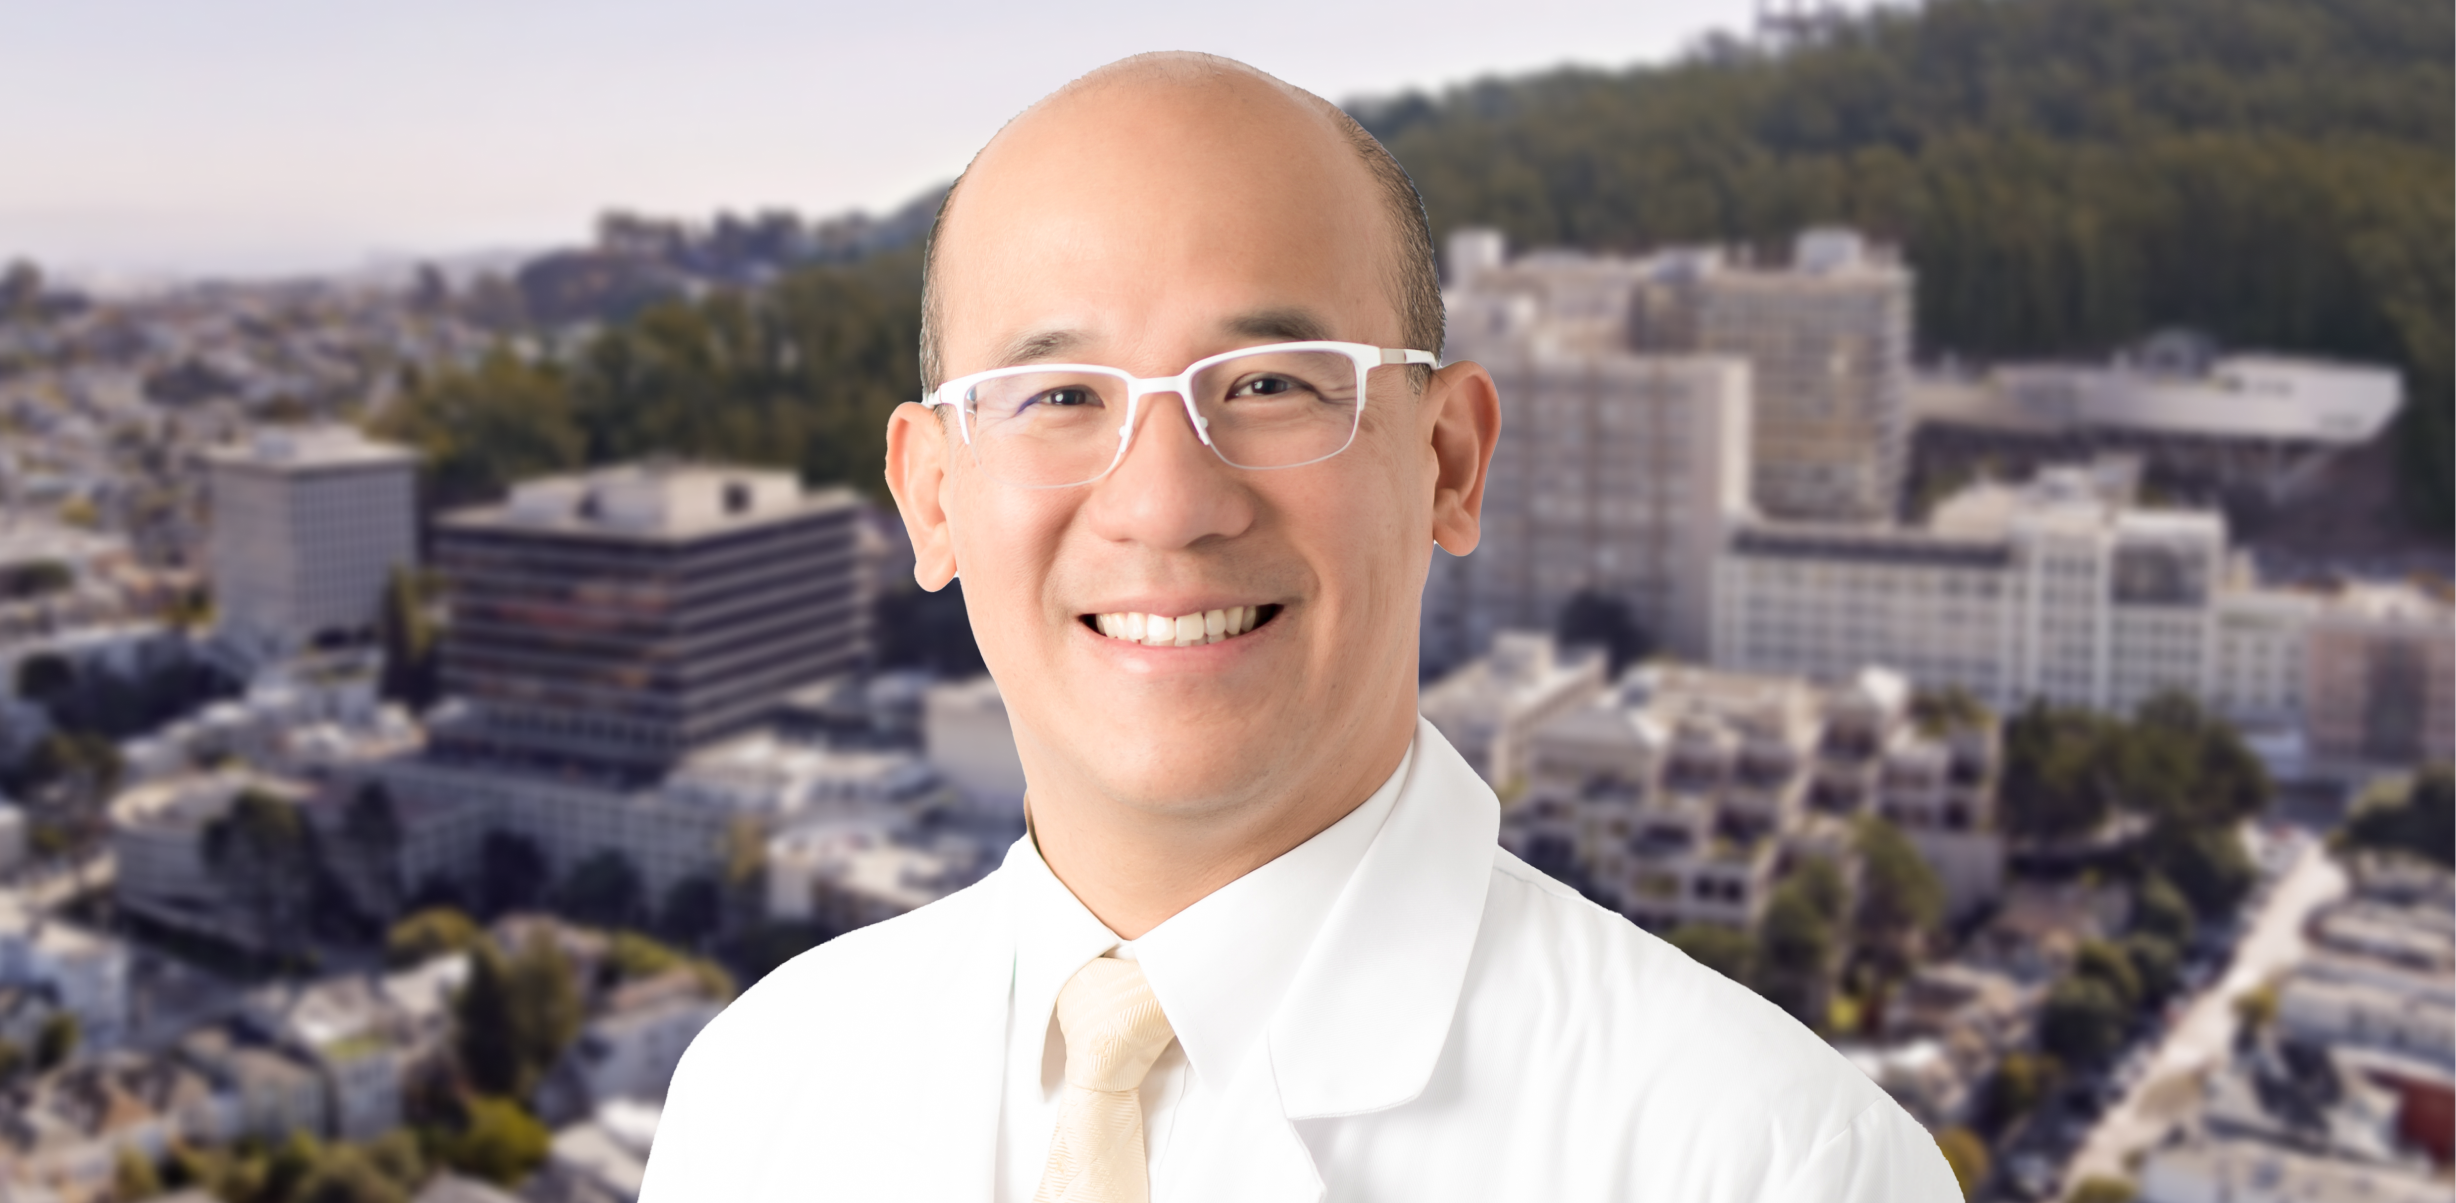 Dr. C. Benjamin Ma in his white coat and tie, wearing white glasses, with the UCSF hospital campus backdrop.